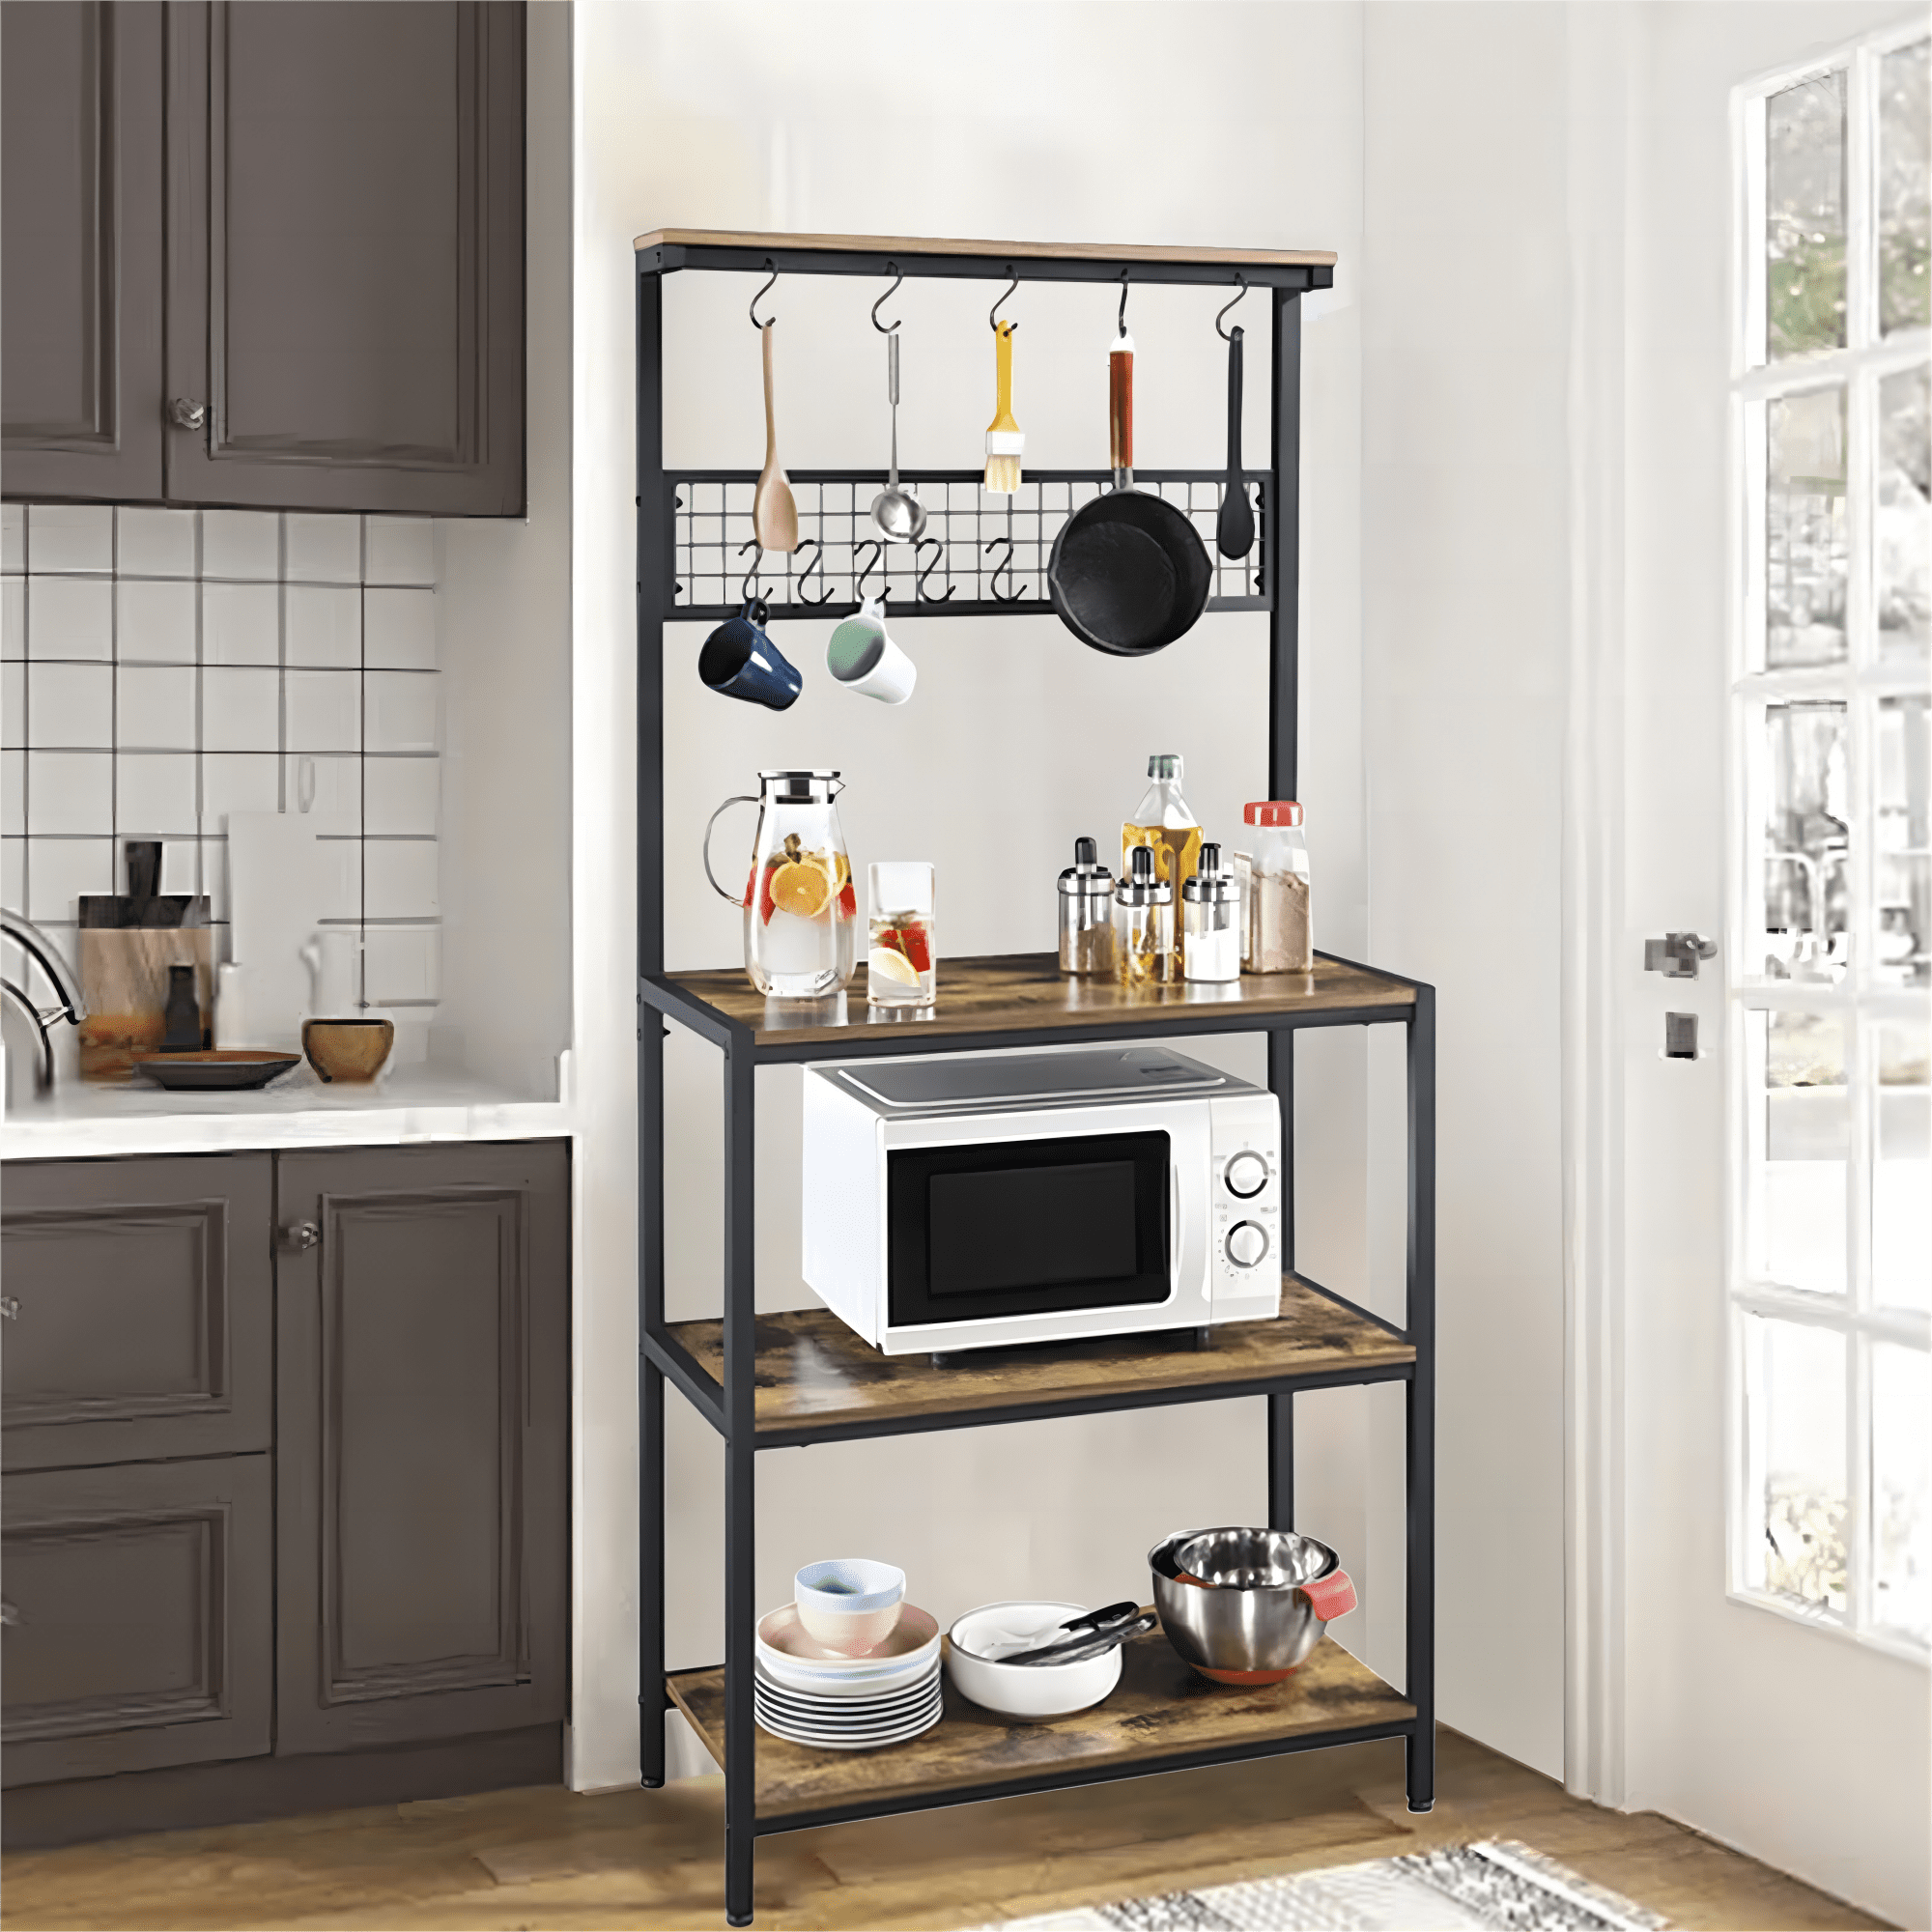 lovemanxi 4-Tier Kitchen Baker's Rack, Free Standing Microwave Oven Stand  Utility Storage Shelf Island Coffee Bar for Living Room, Home Office（Rustic